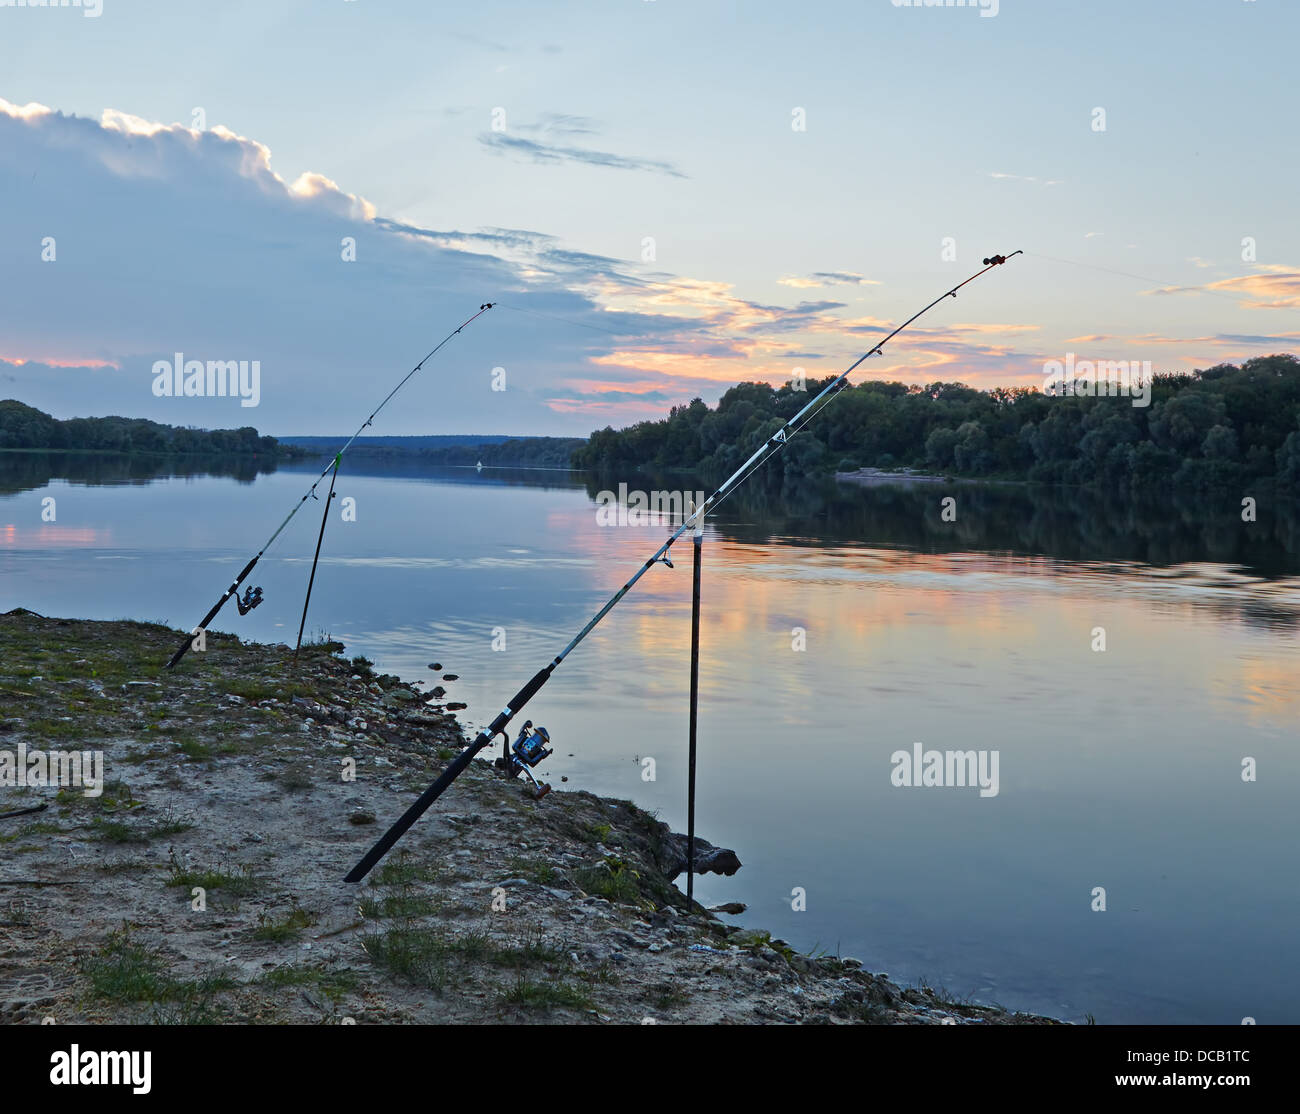 Rods in the sunset on the river, close-up, landscape image Stock Photo